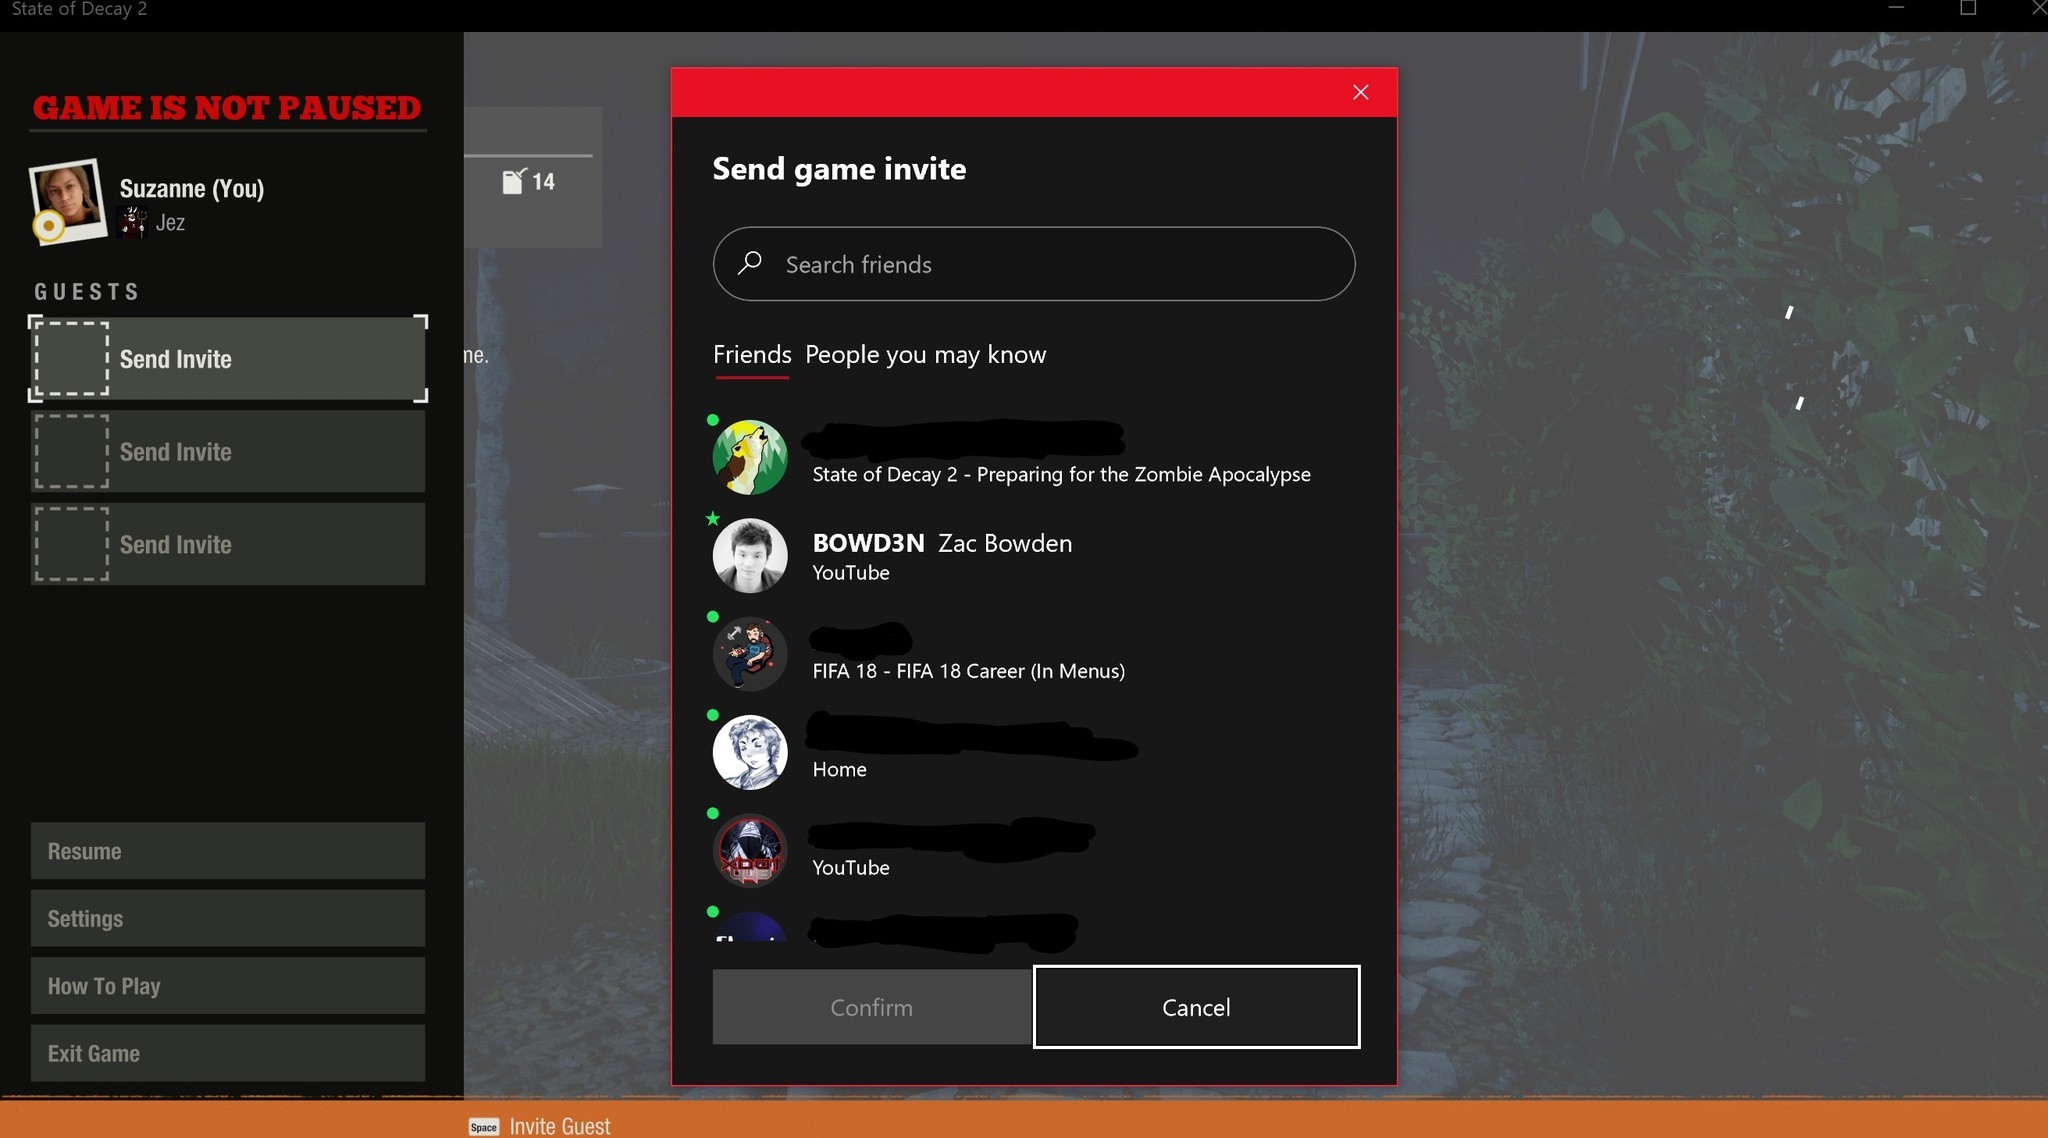 How To Use Multiplayer In Xbox Live Games On Windows 10 Pcs Windows Central